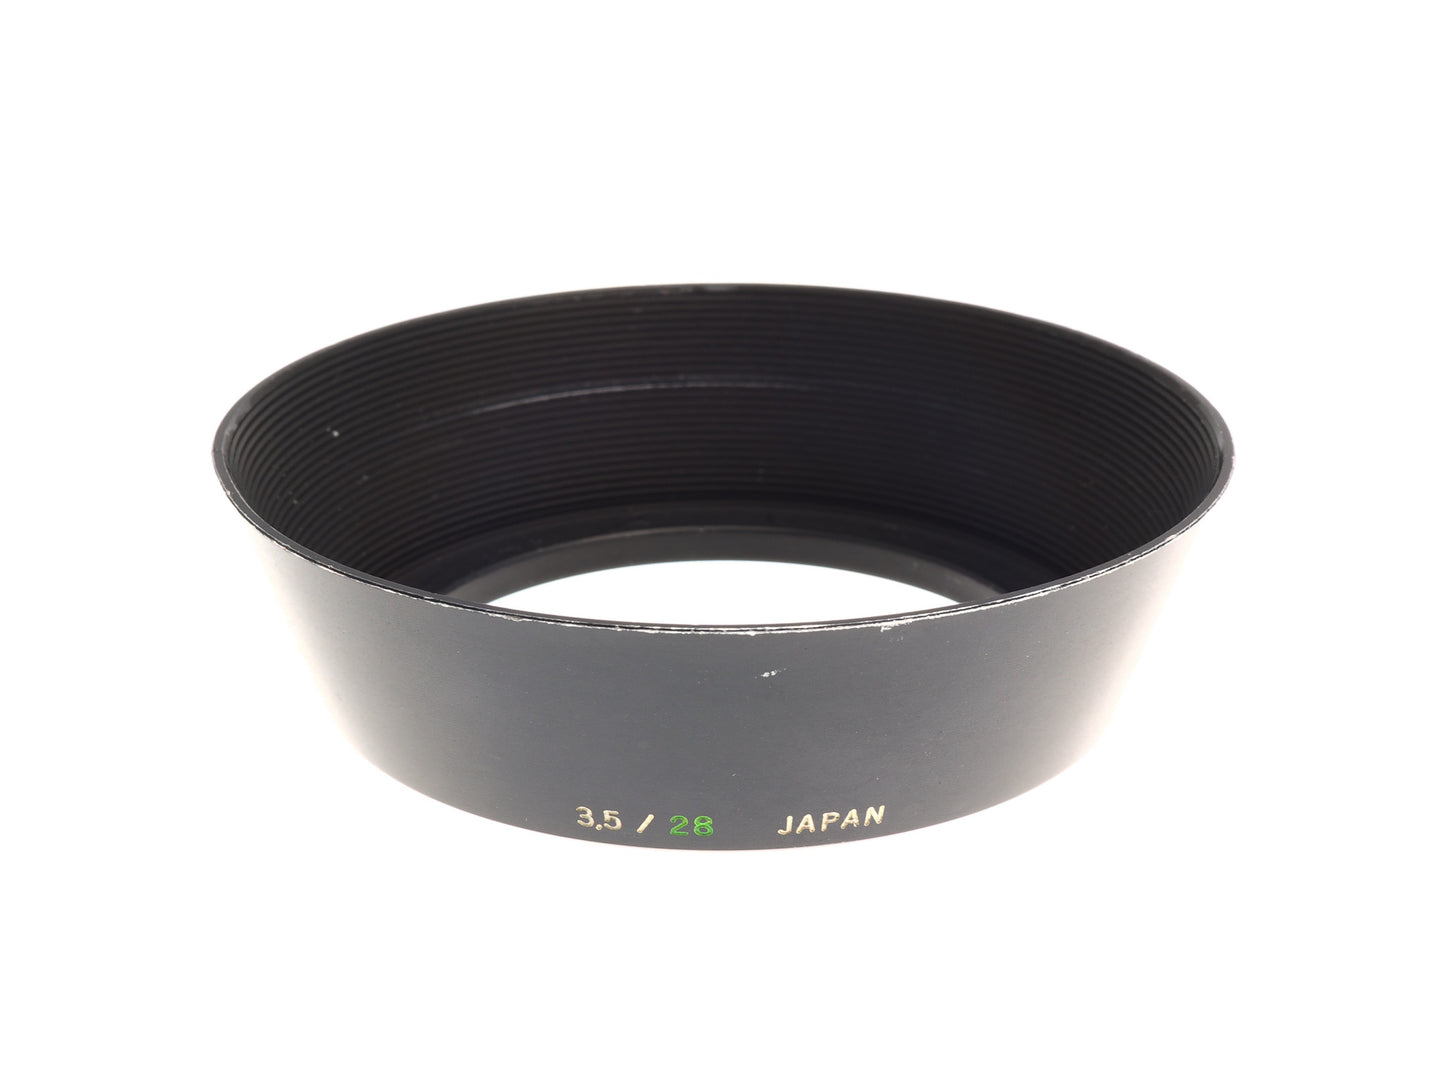 Olympus Metal Lens Hood for 28mm f3.5 - Accessory